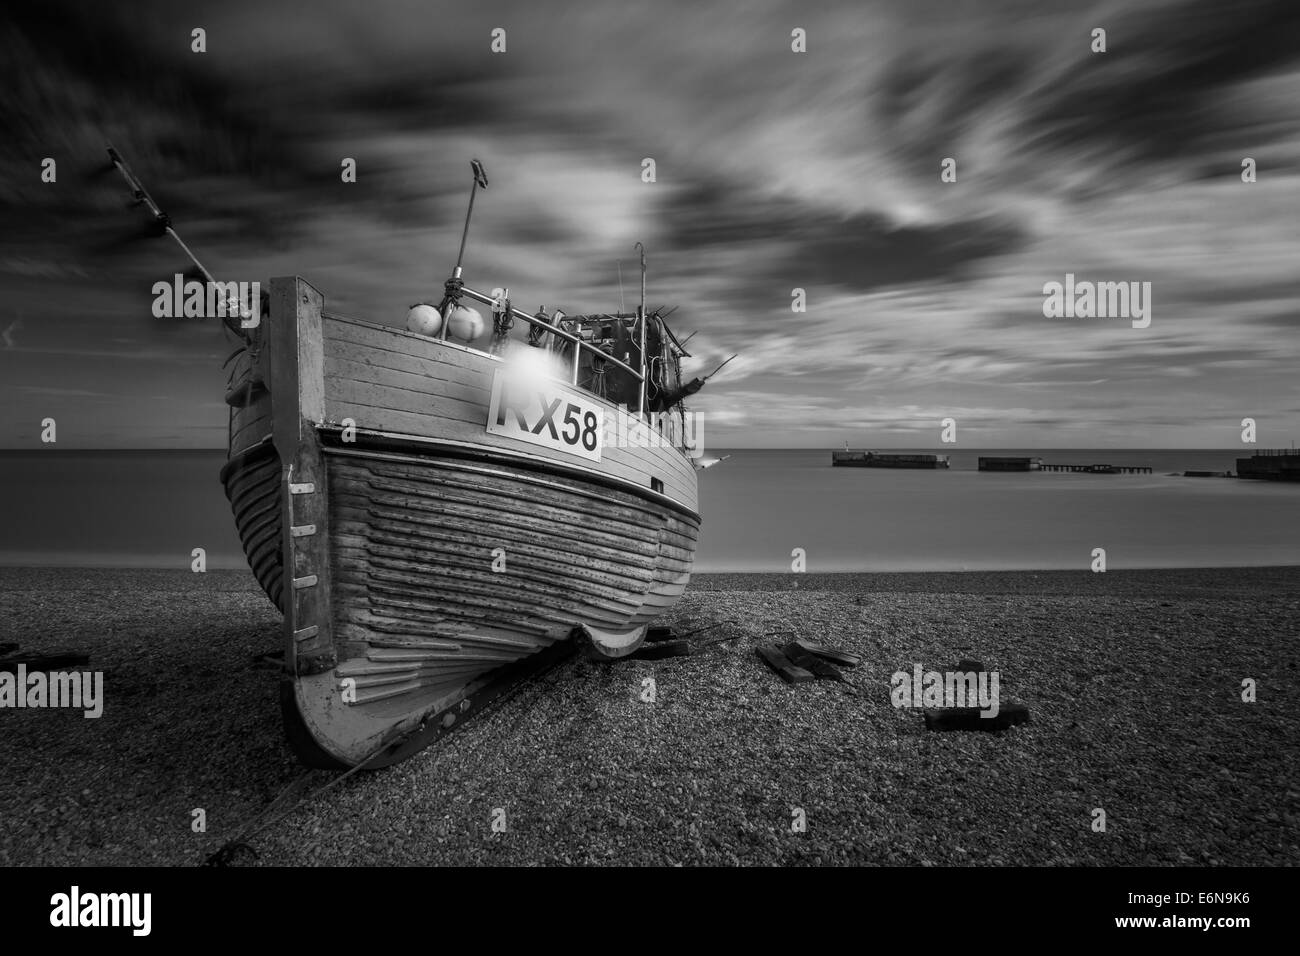 A fishing boat on the beach in Hastings, East Sussex, England. Stock Photo